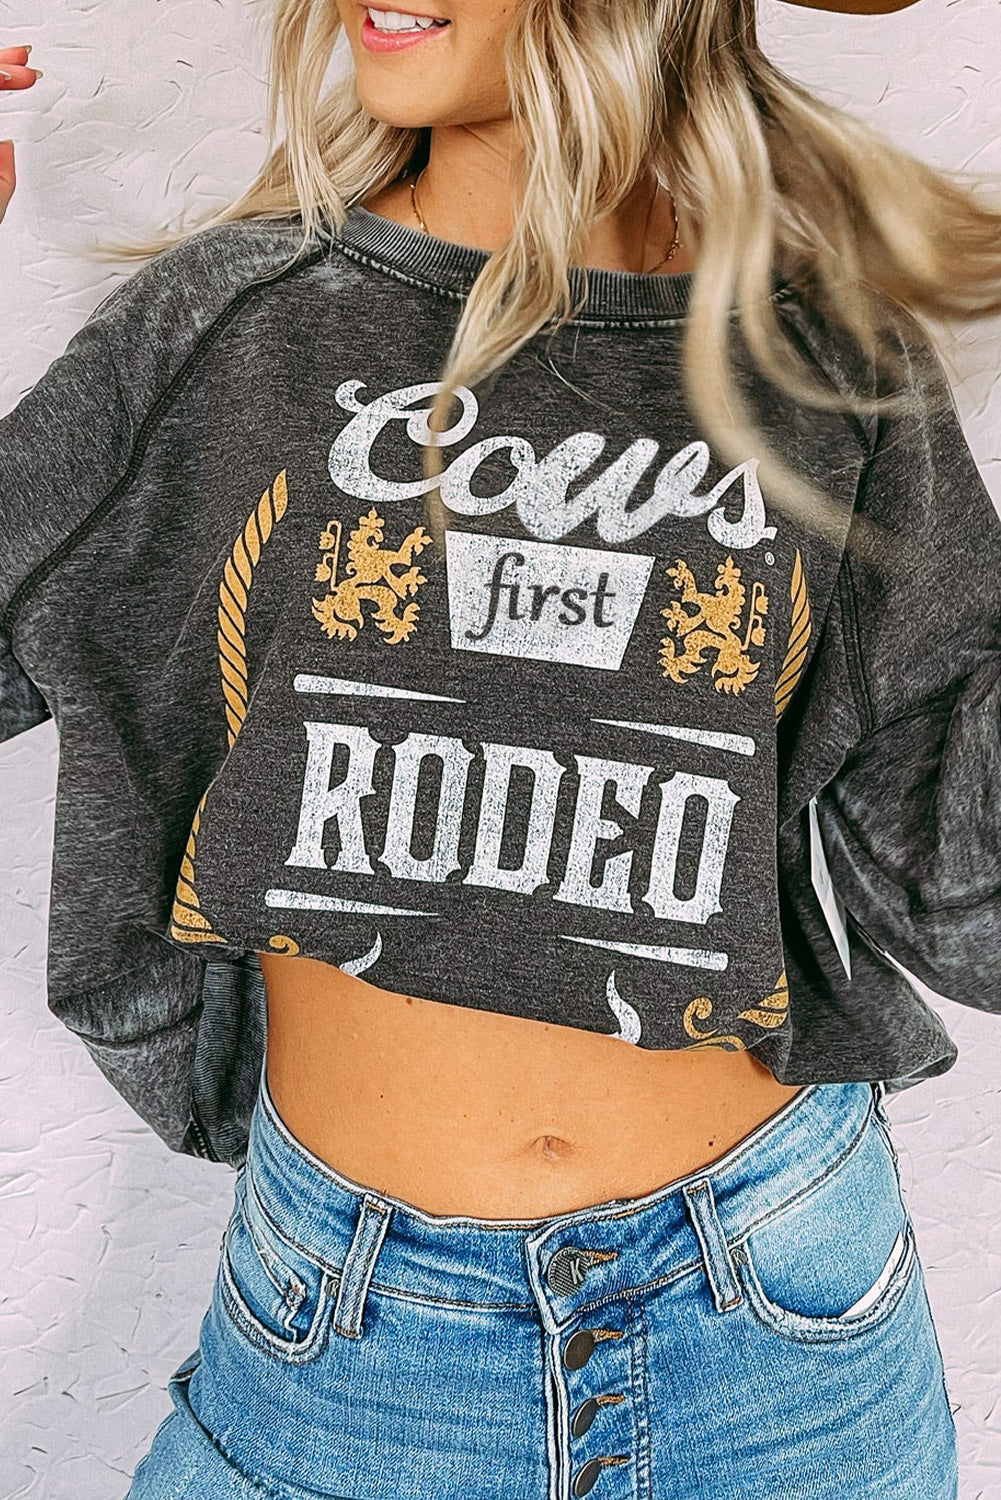 Siva Coors Banquet RODEO Graphic Mineral isprana majica